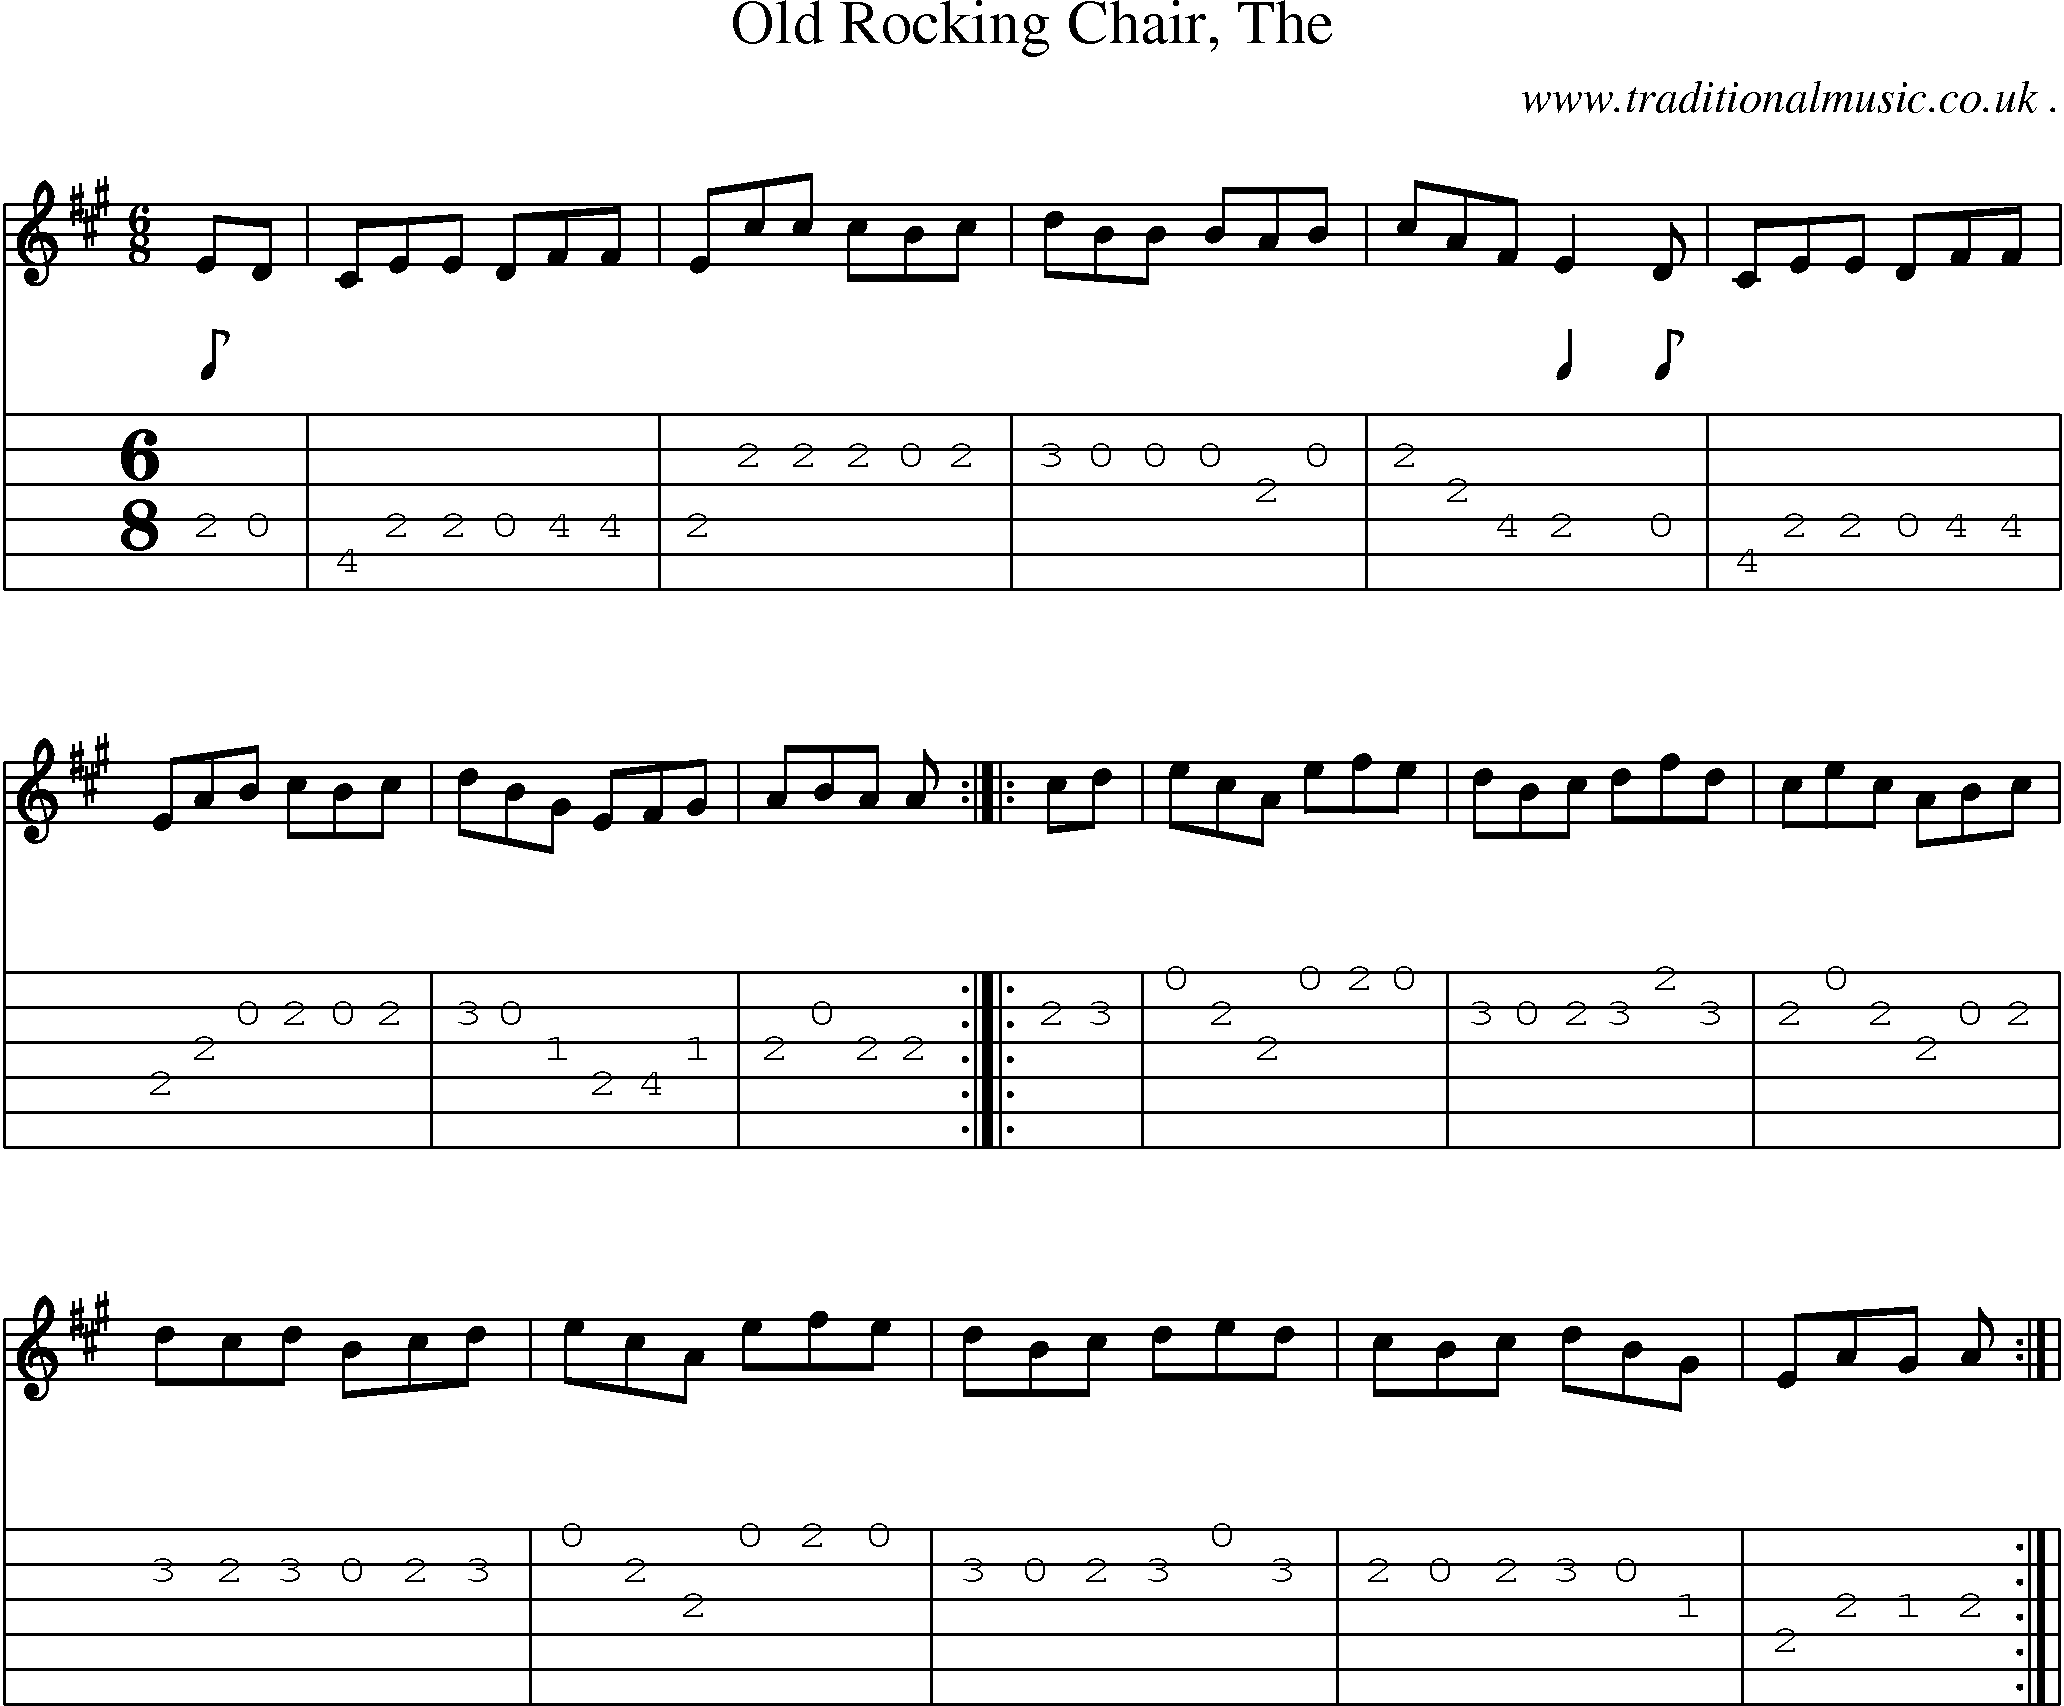 Music Score and Guitar Tabs for Old Rocking Chair The